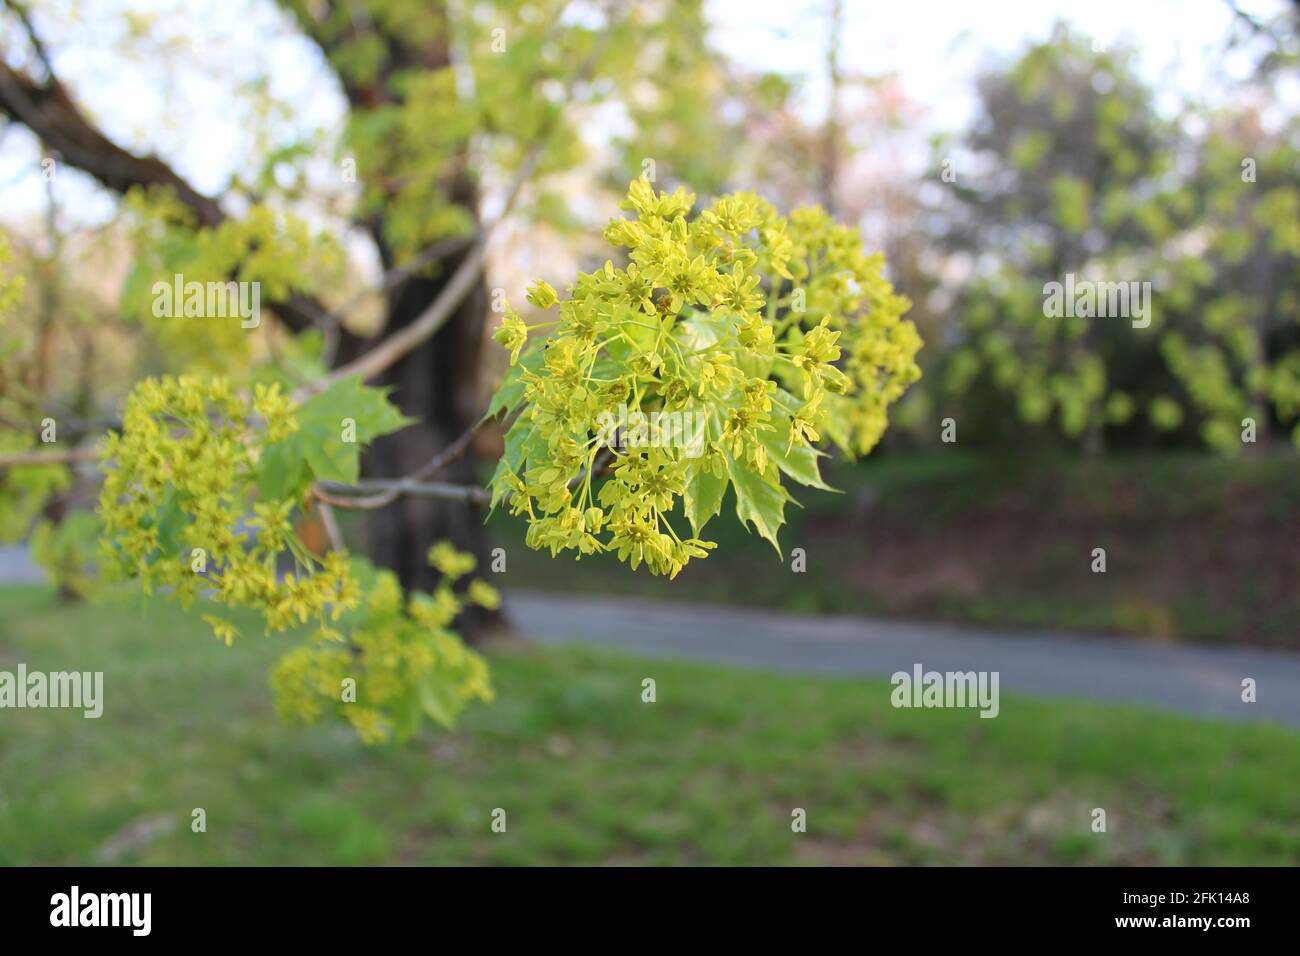 A Cluster of Norway Maple Flowers in Spring Stock Photo